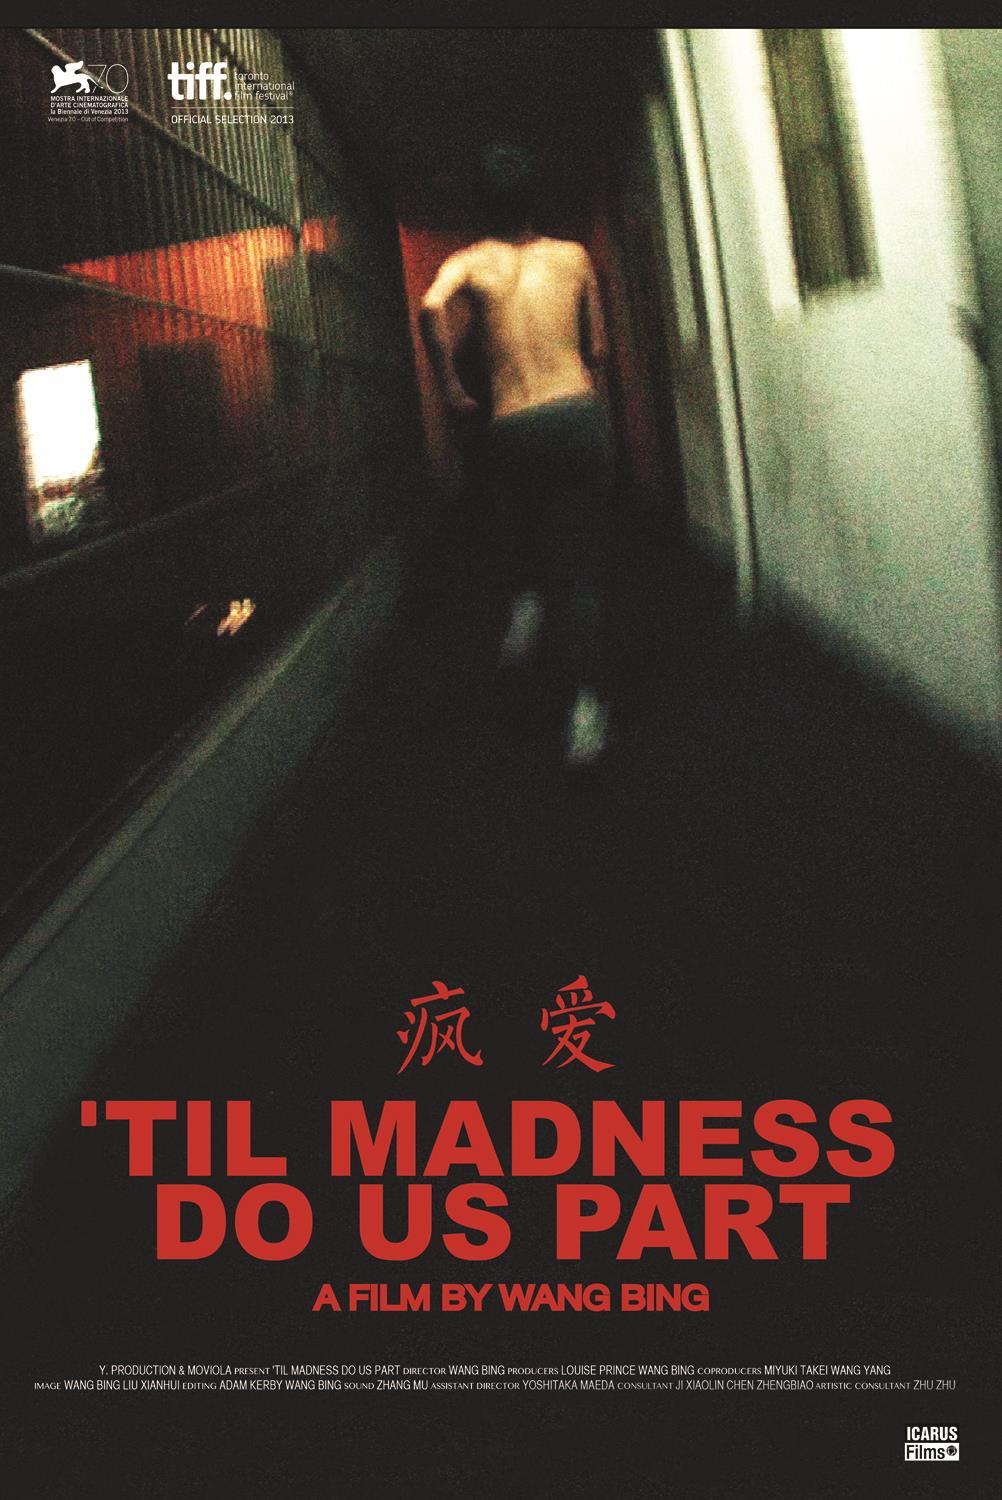 TIL MADNESS DO US PART An Icarus Films Release A film by Wang Bing North American Theatrical Premiere Exclusive Engagement at Anthology